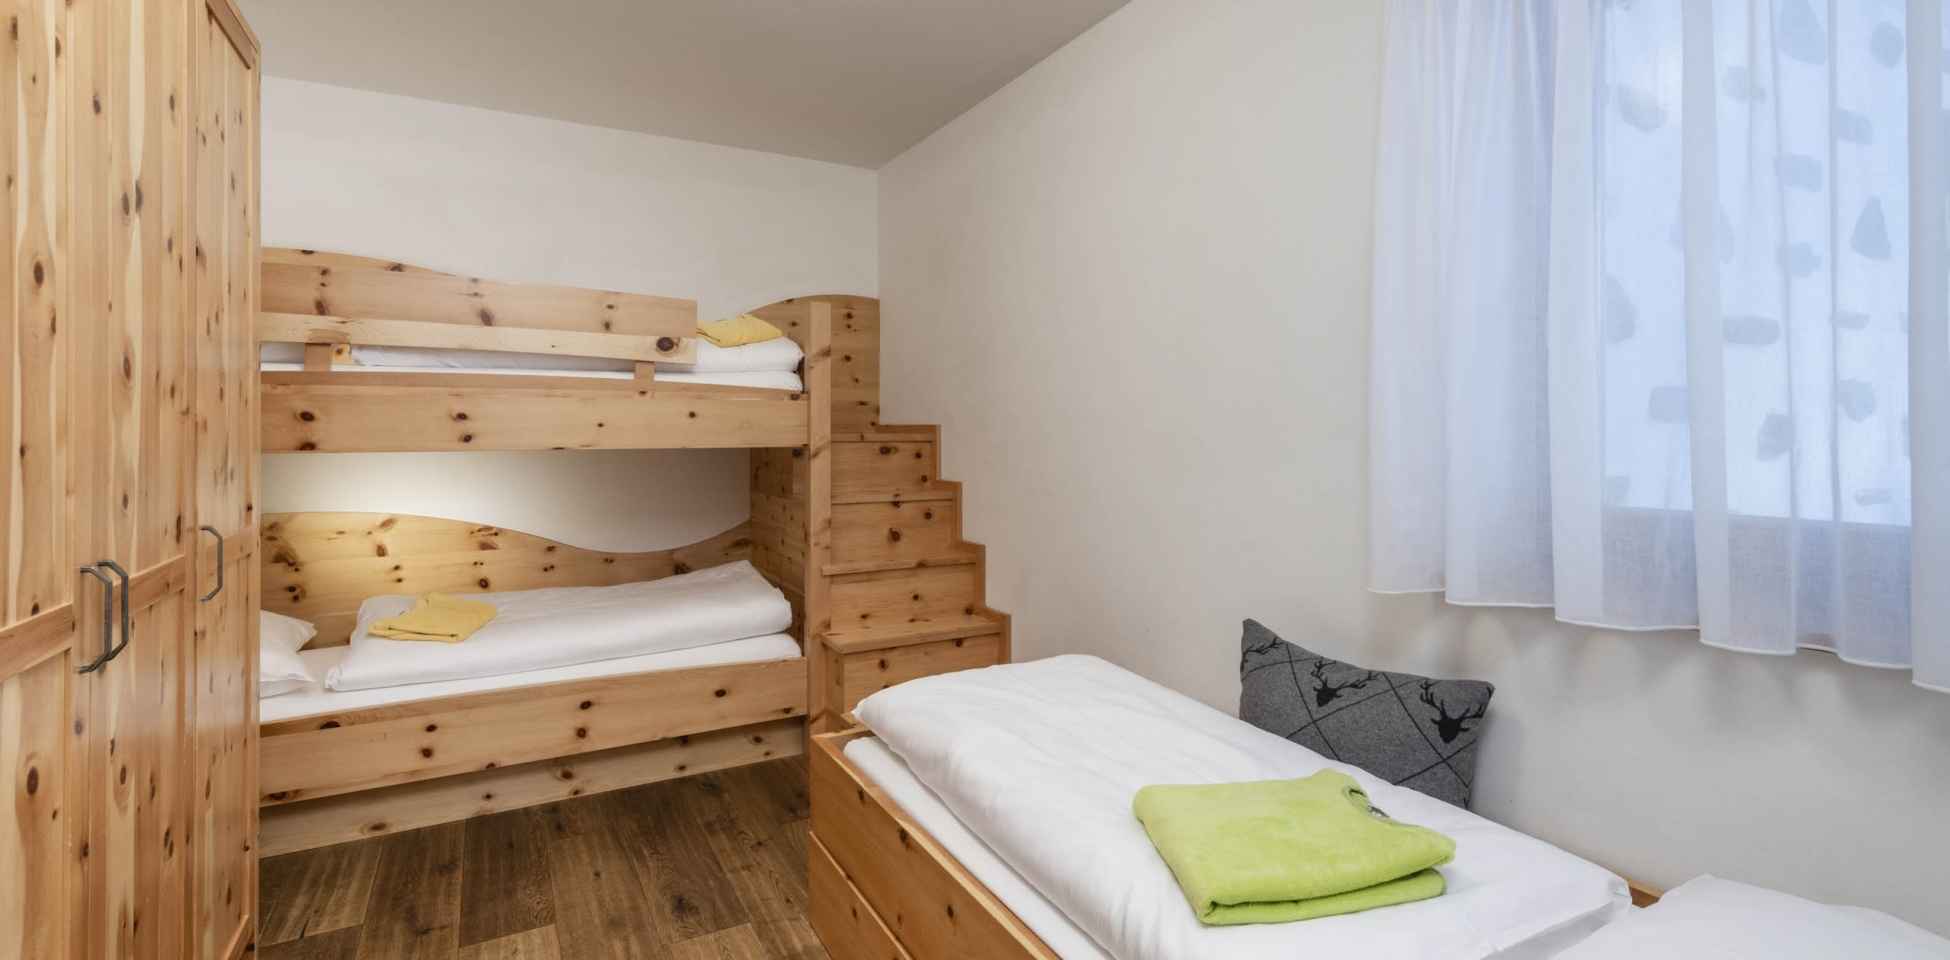 Bunk beds inside Chalet at the South Tyrolean Nature Resort